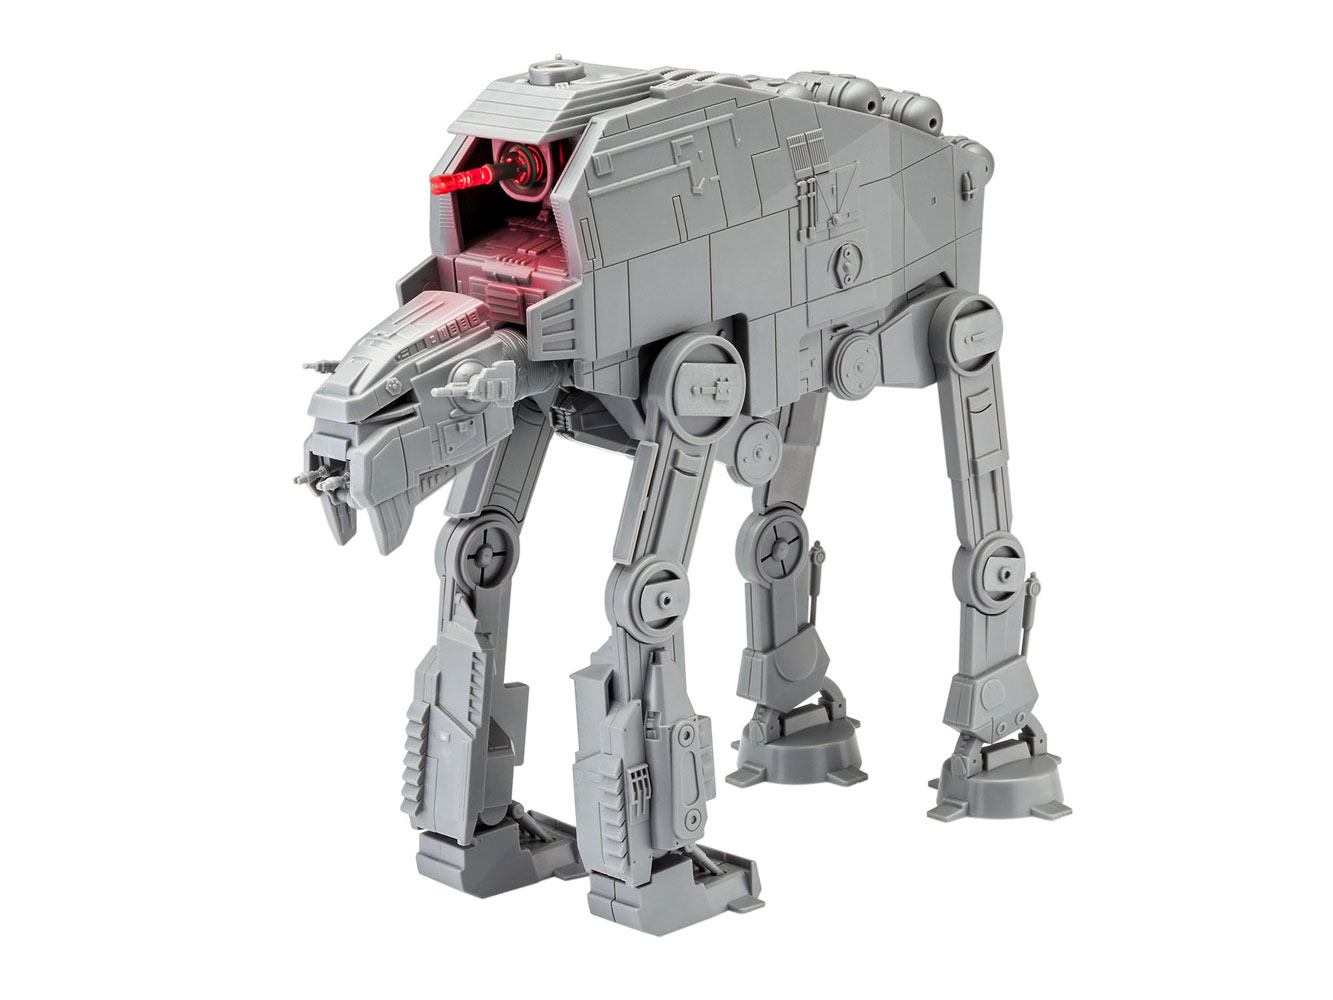 Star Wars pack maquette Build & Play sonore et lumineuse 1/164 1st Order Heavy Assault Walker